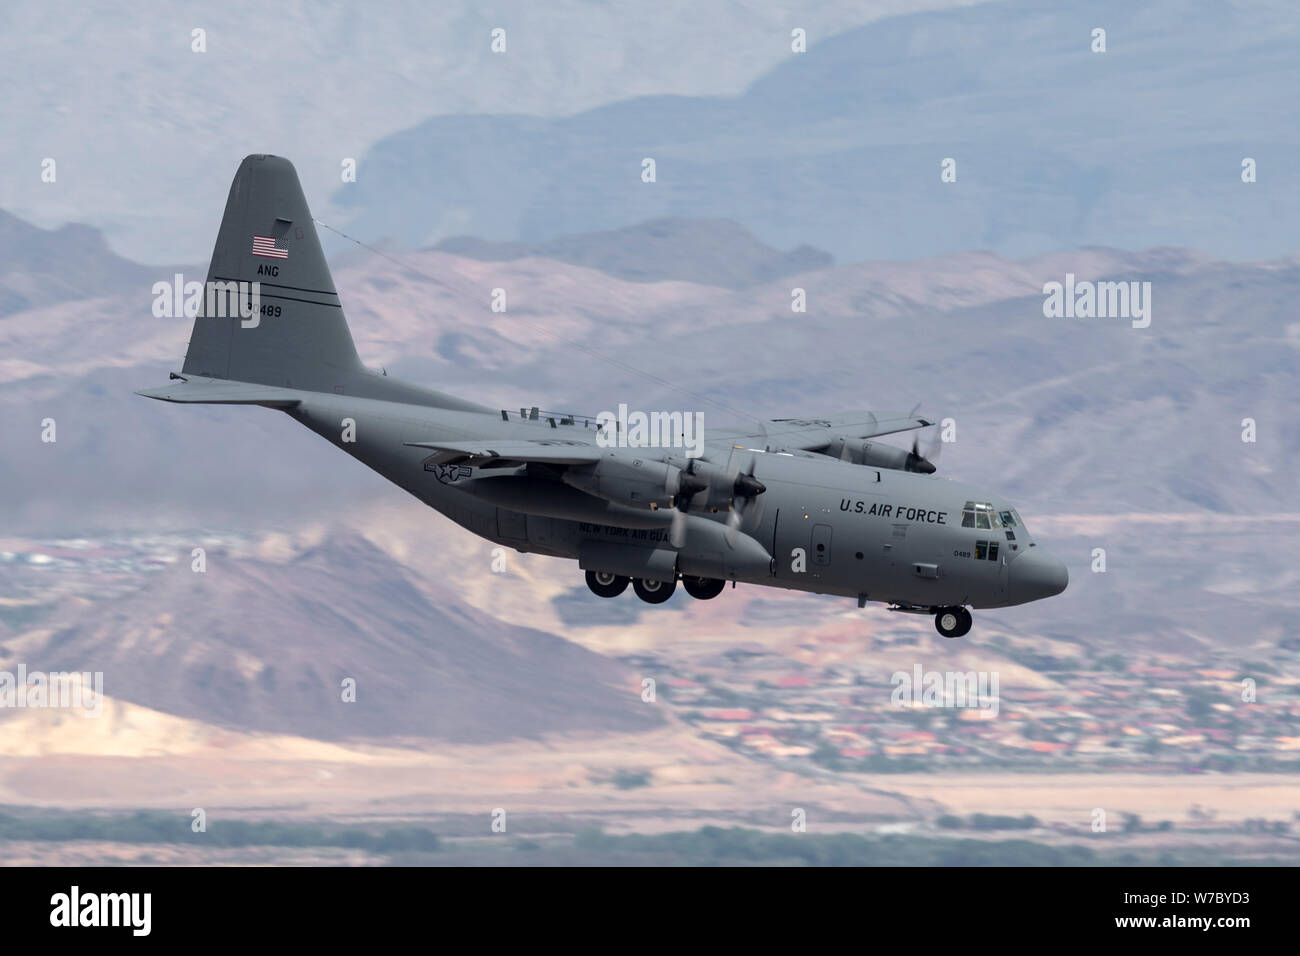 United States Air Force (USAF) Lockheed C-130H Hercules from the 109th Airlift Wing, New York Air National Guard on approach to land at McCarran Inter Stock Photo